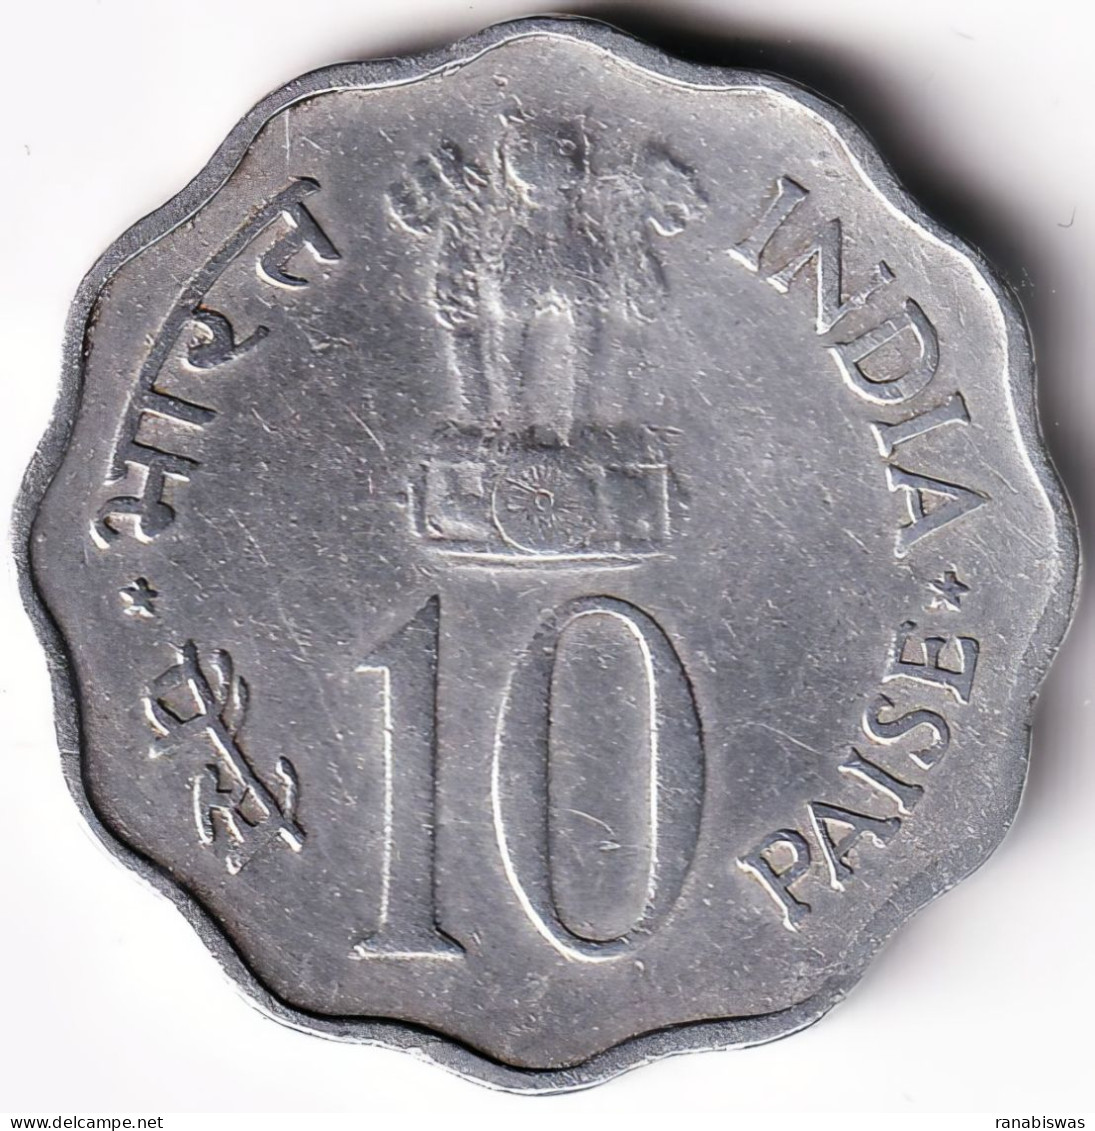 INDIA COIN LOT 91, 10 PAISE 1976, FOOD & WORK FOR ALL, FAO, BOMBAY MINT, XF - Inde